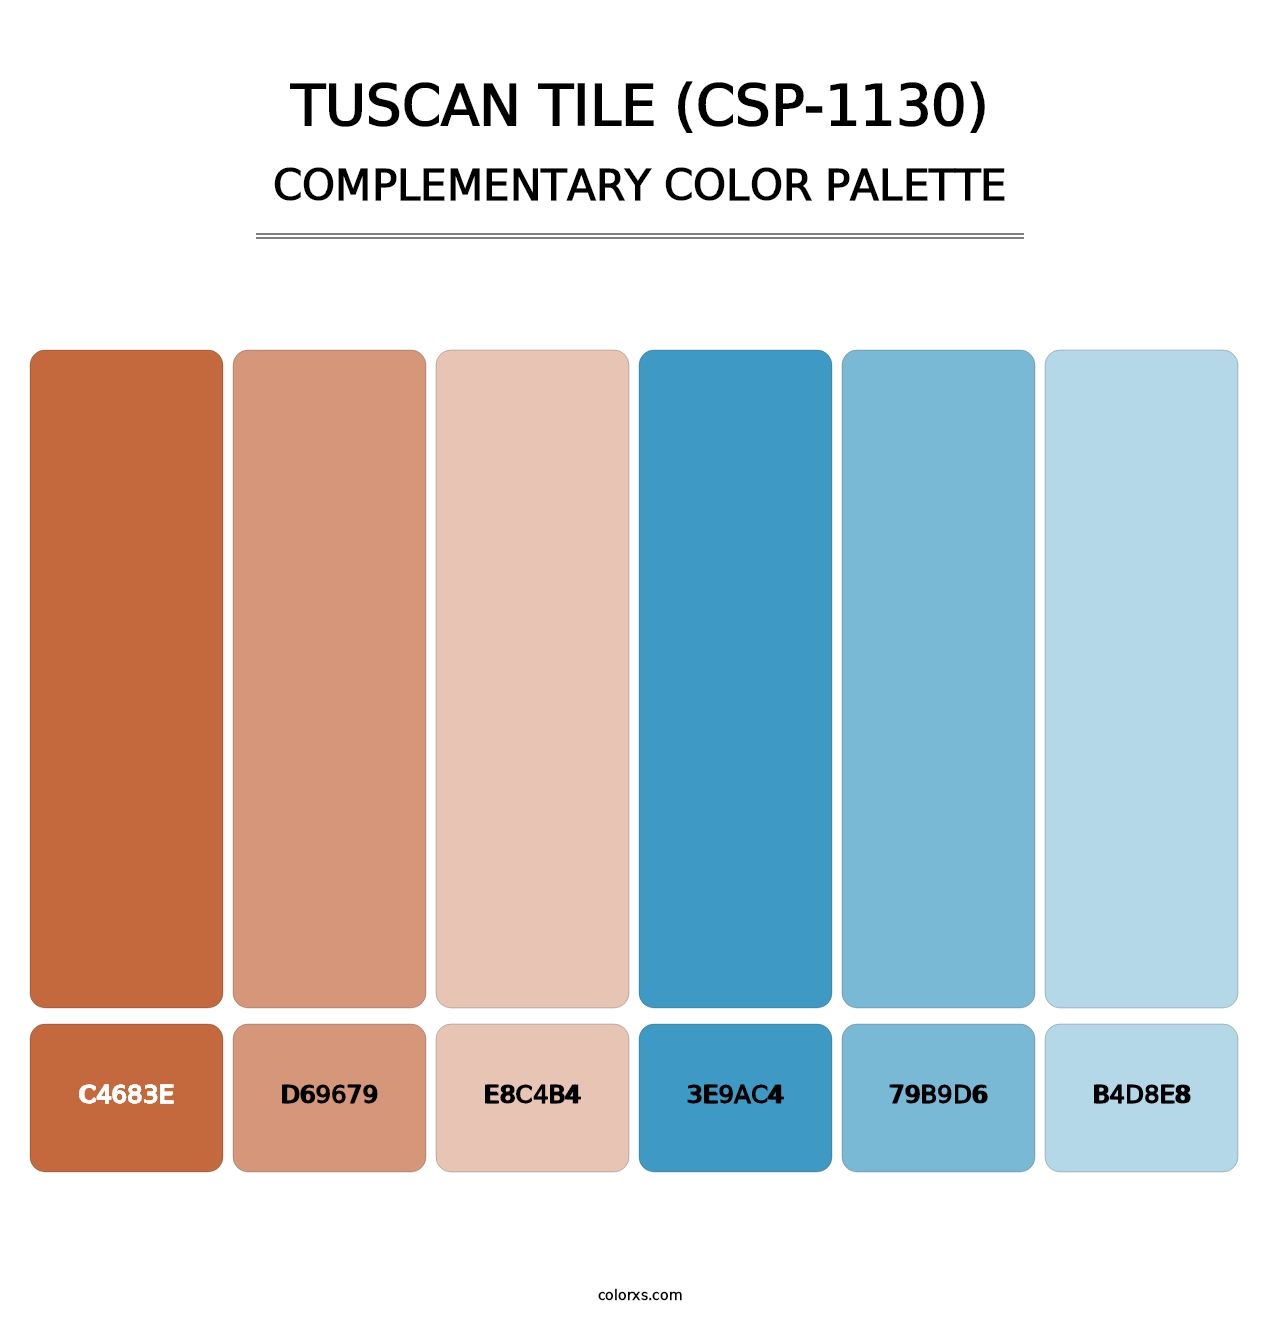 Tuscan Tile (CSP-1130) - Complementary Color Palette